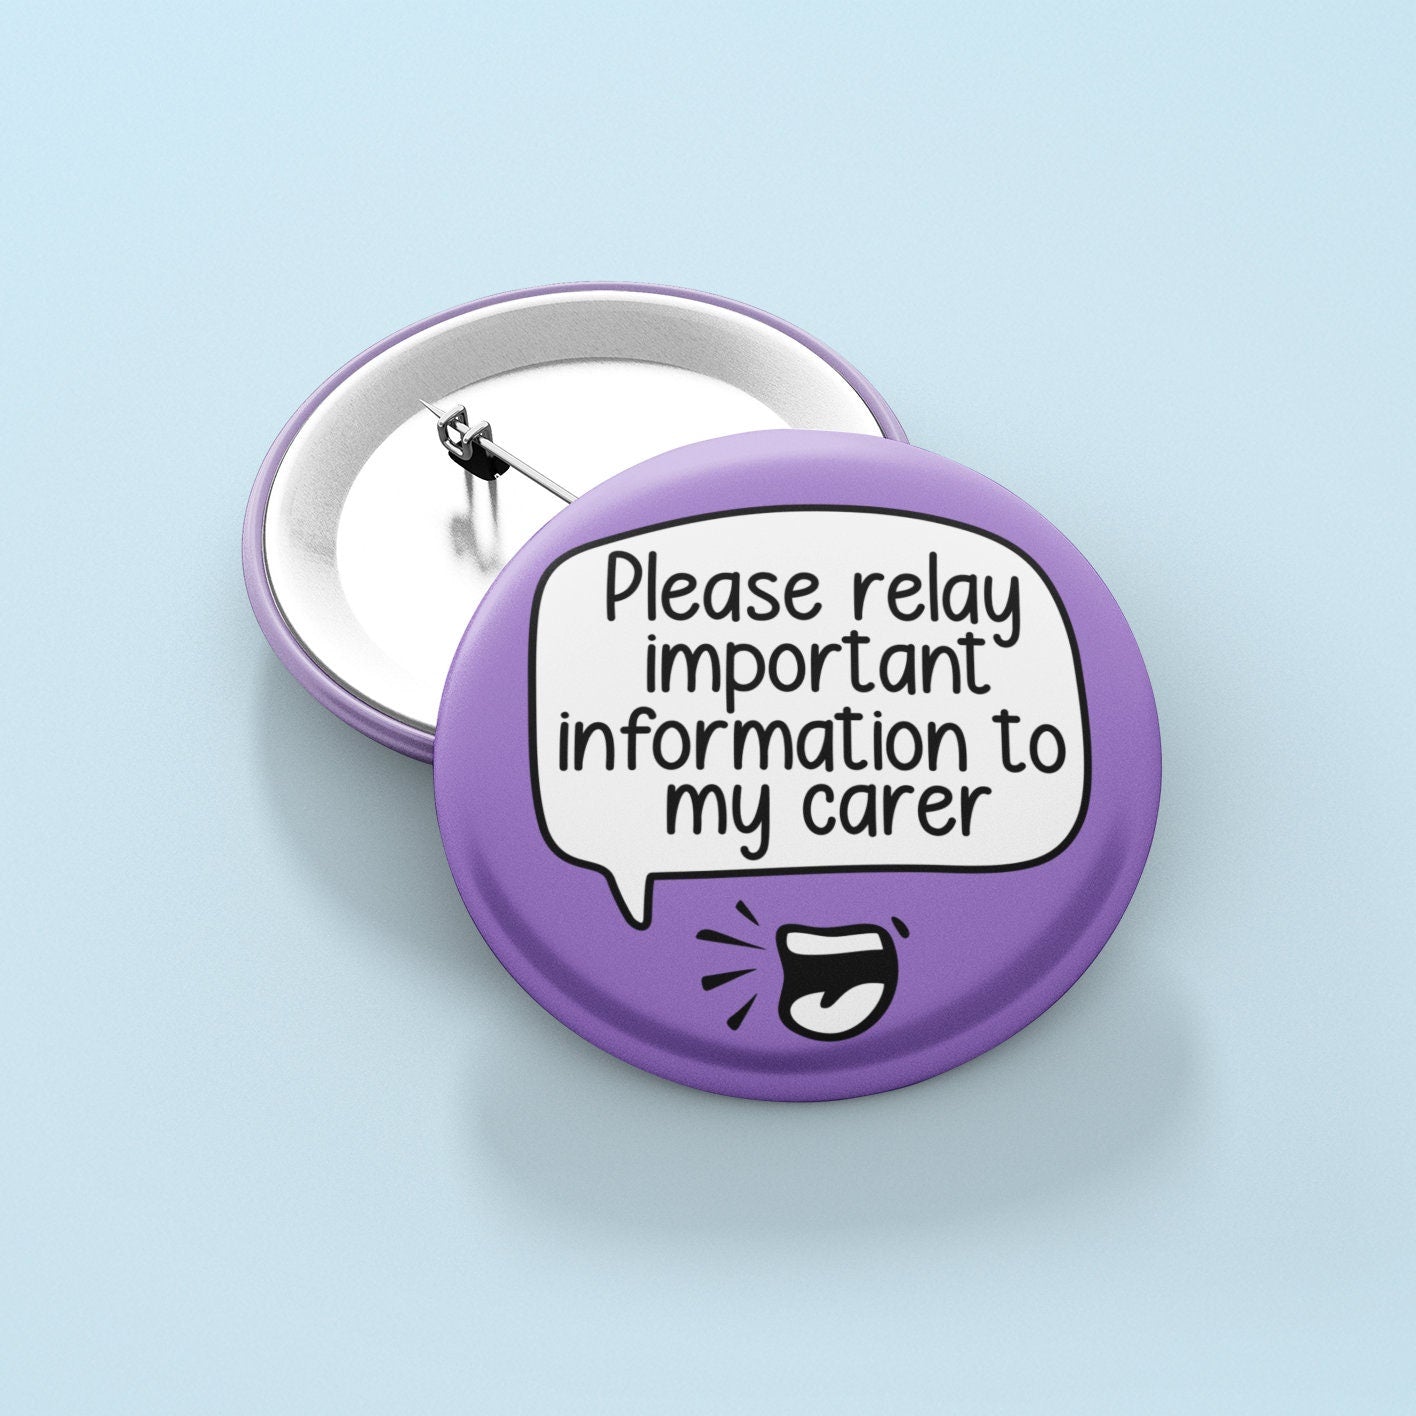 Please Relay Important Information To My Carer / Friend / Partner / MULTICHOICE - Pin Badge